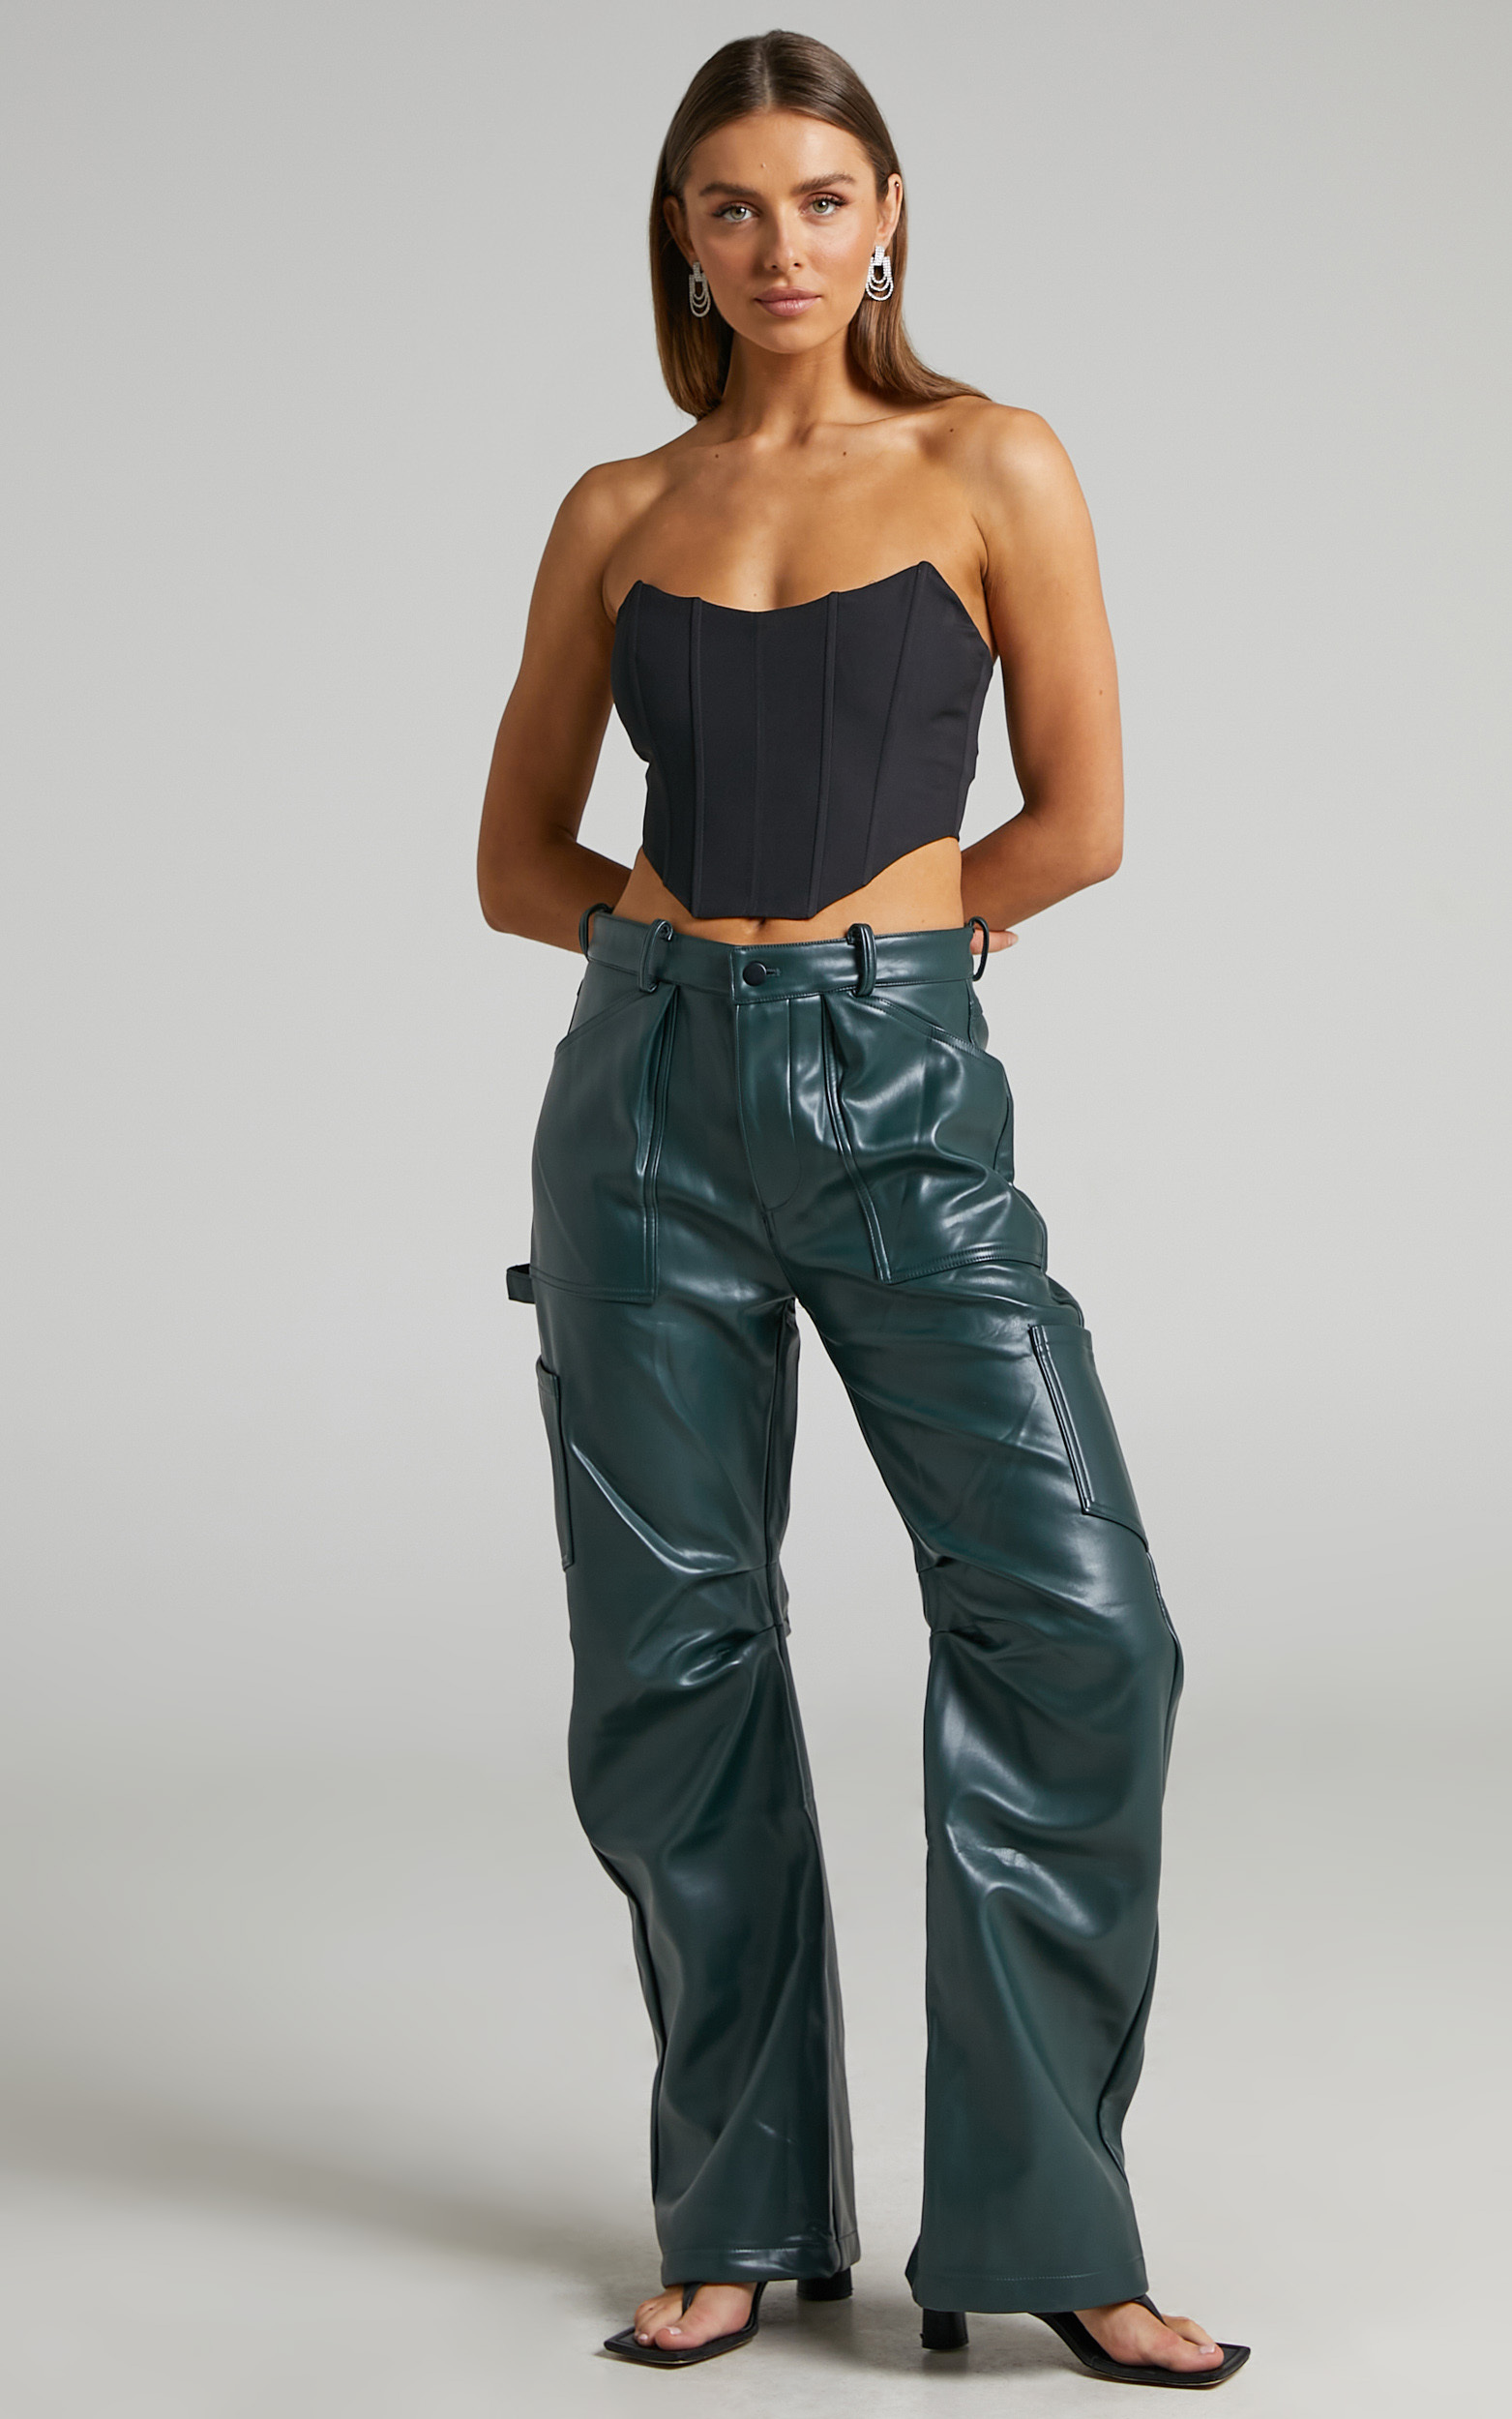 Lioness - Miami Vice Pant in Moss - L, GRN1, hi-res image number null